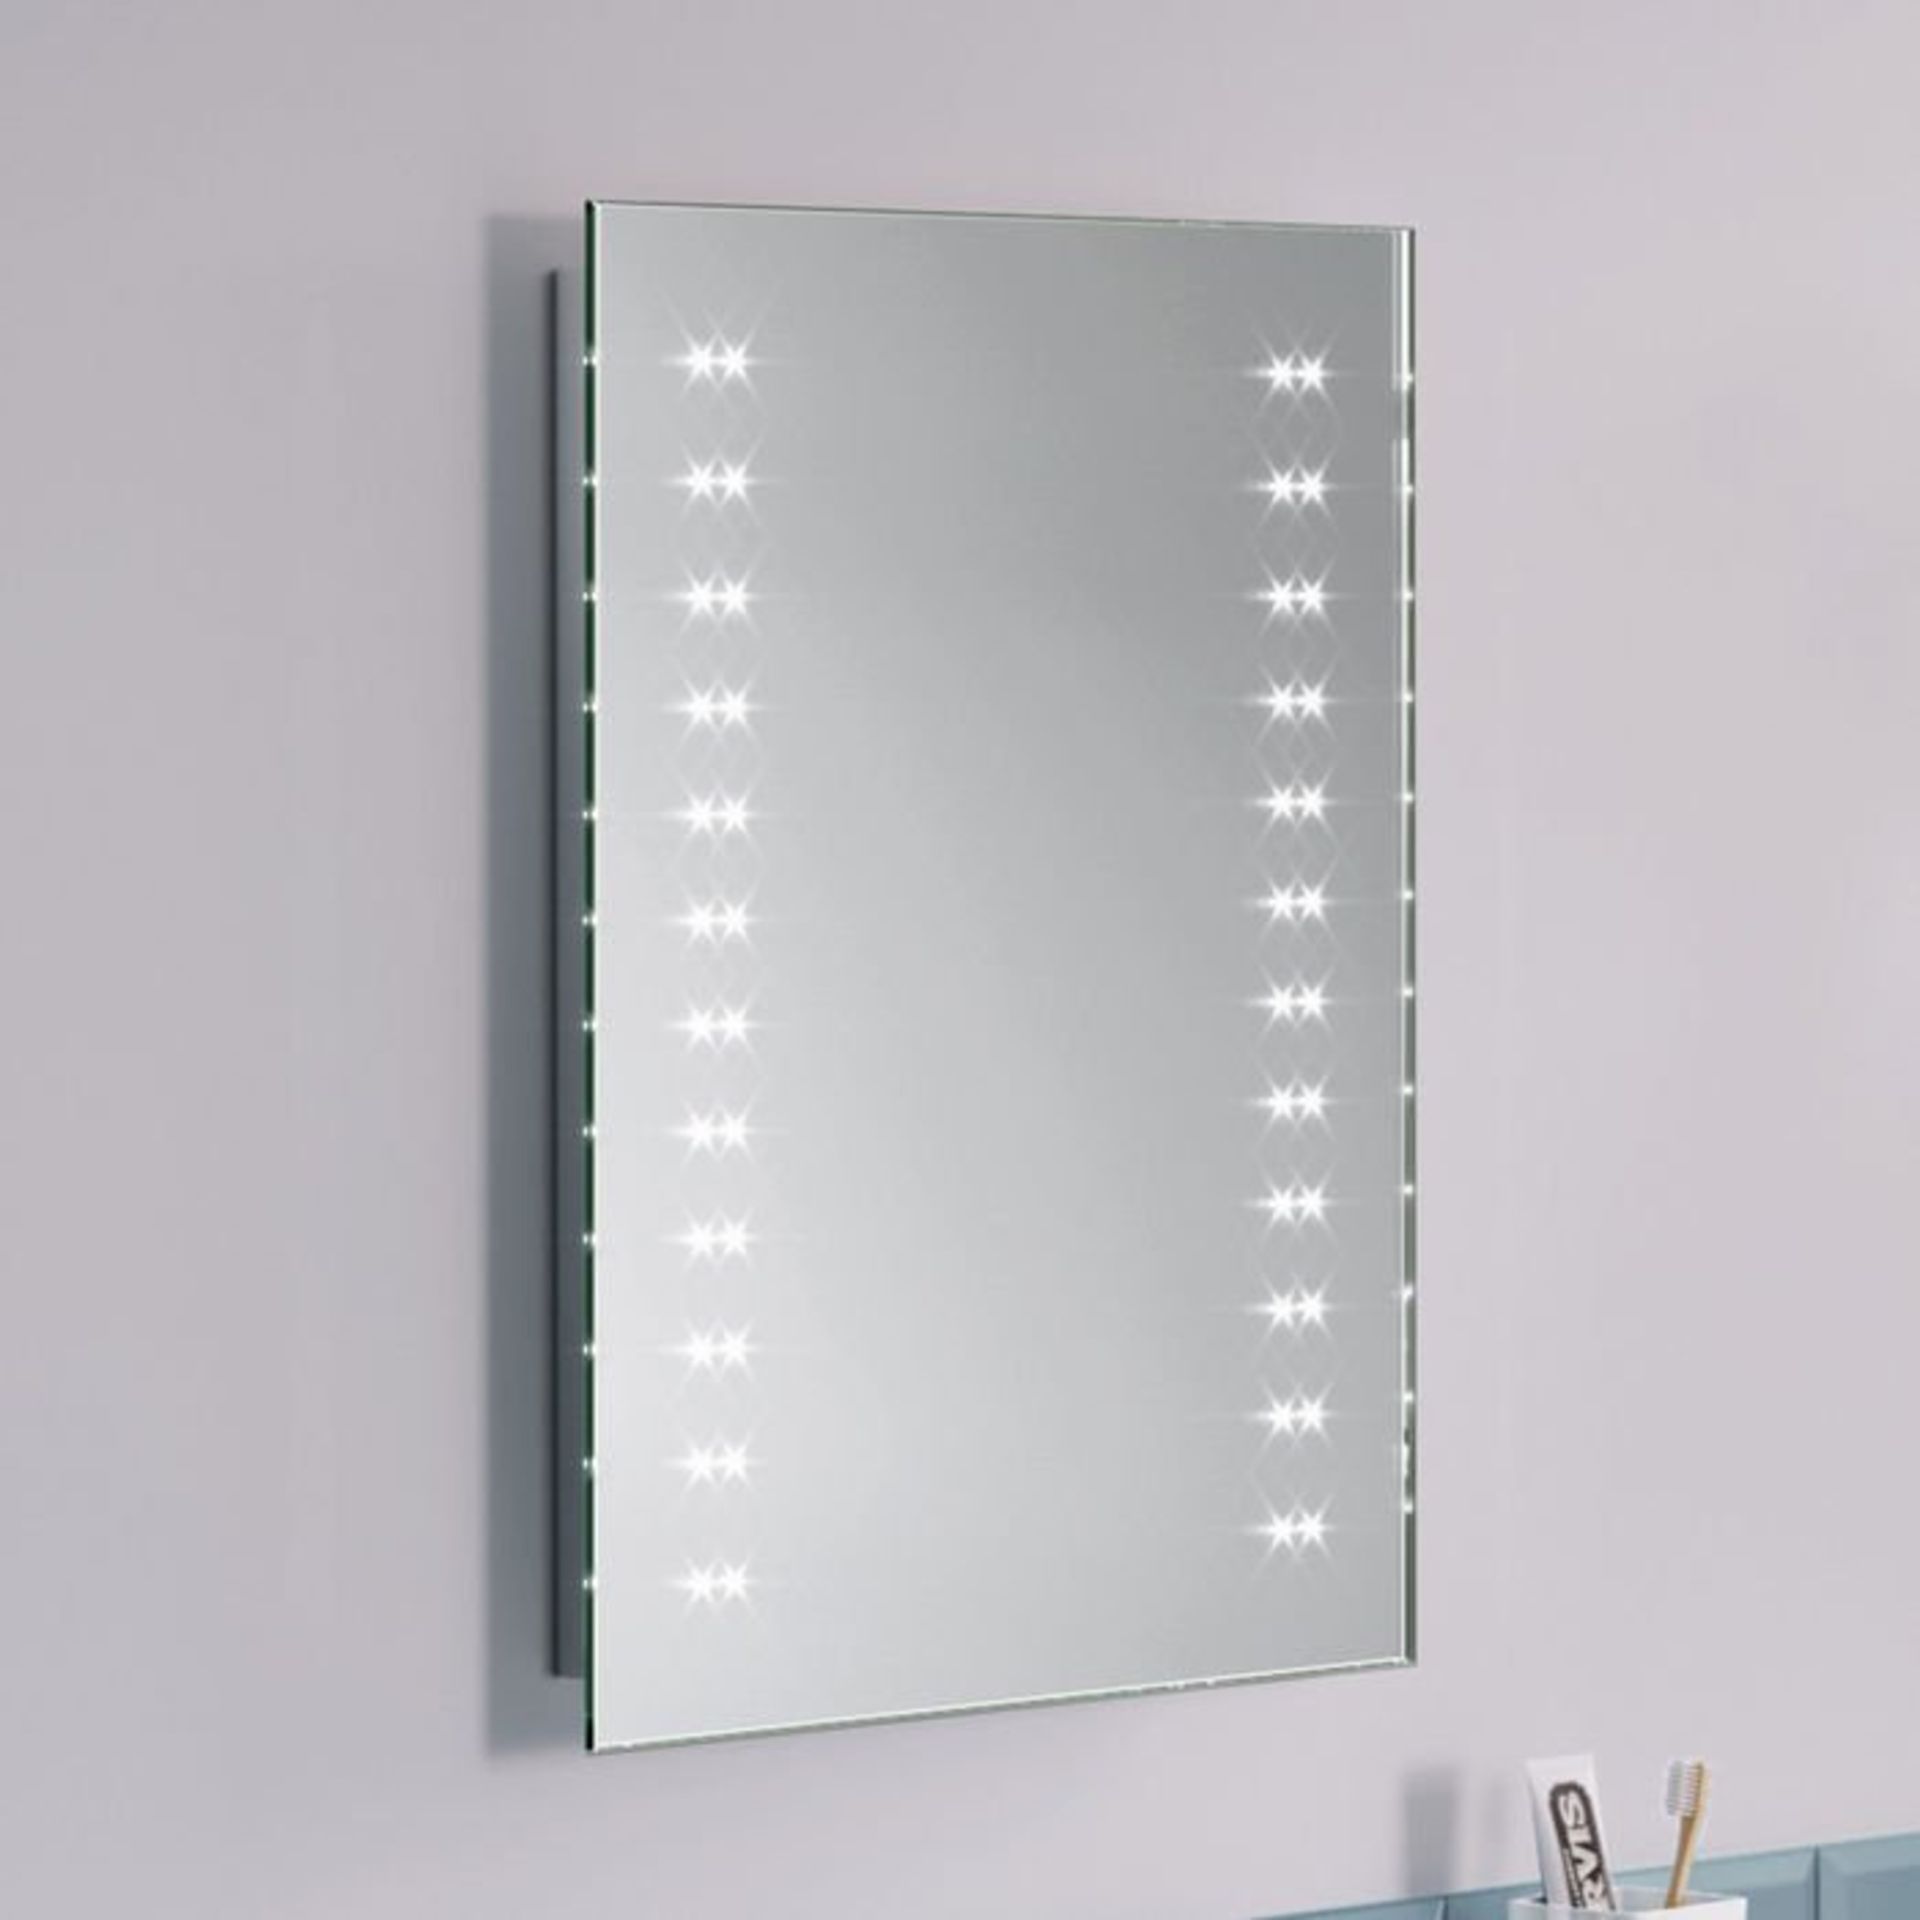 (K59) 390x500mm Galactic LED Mirror - Battery Operated. Energy saving controlled On / Off switch - Image 2 of 2